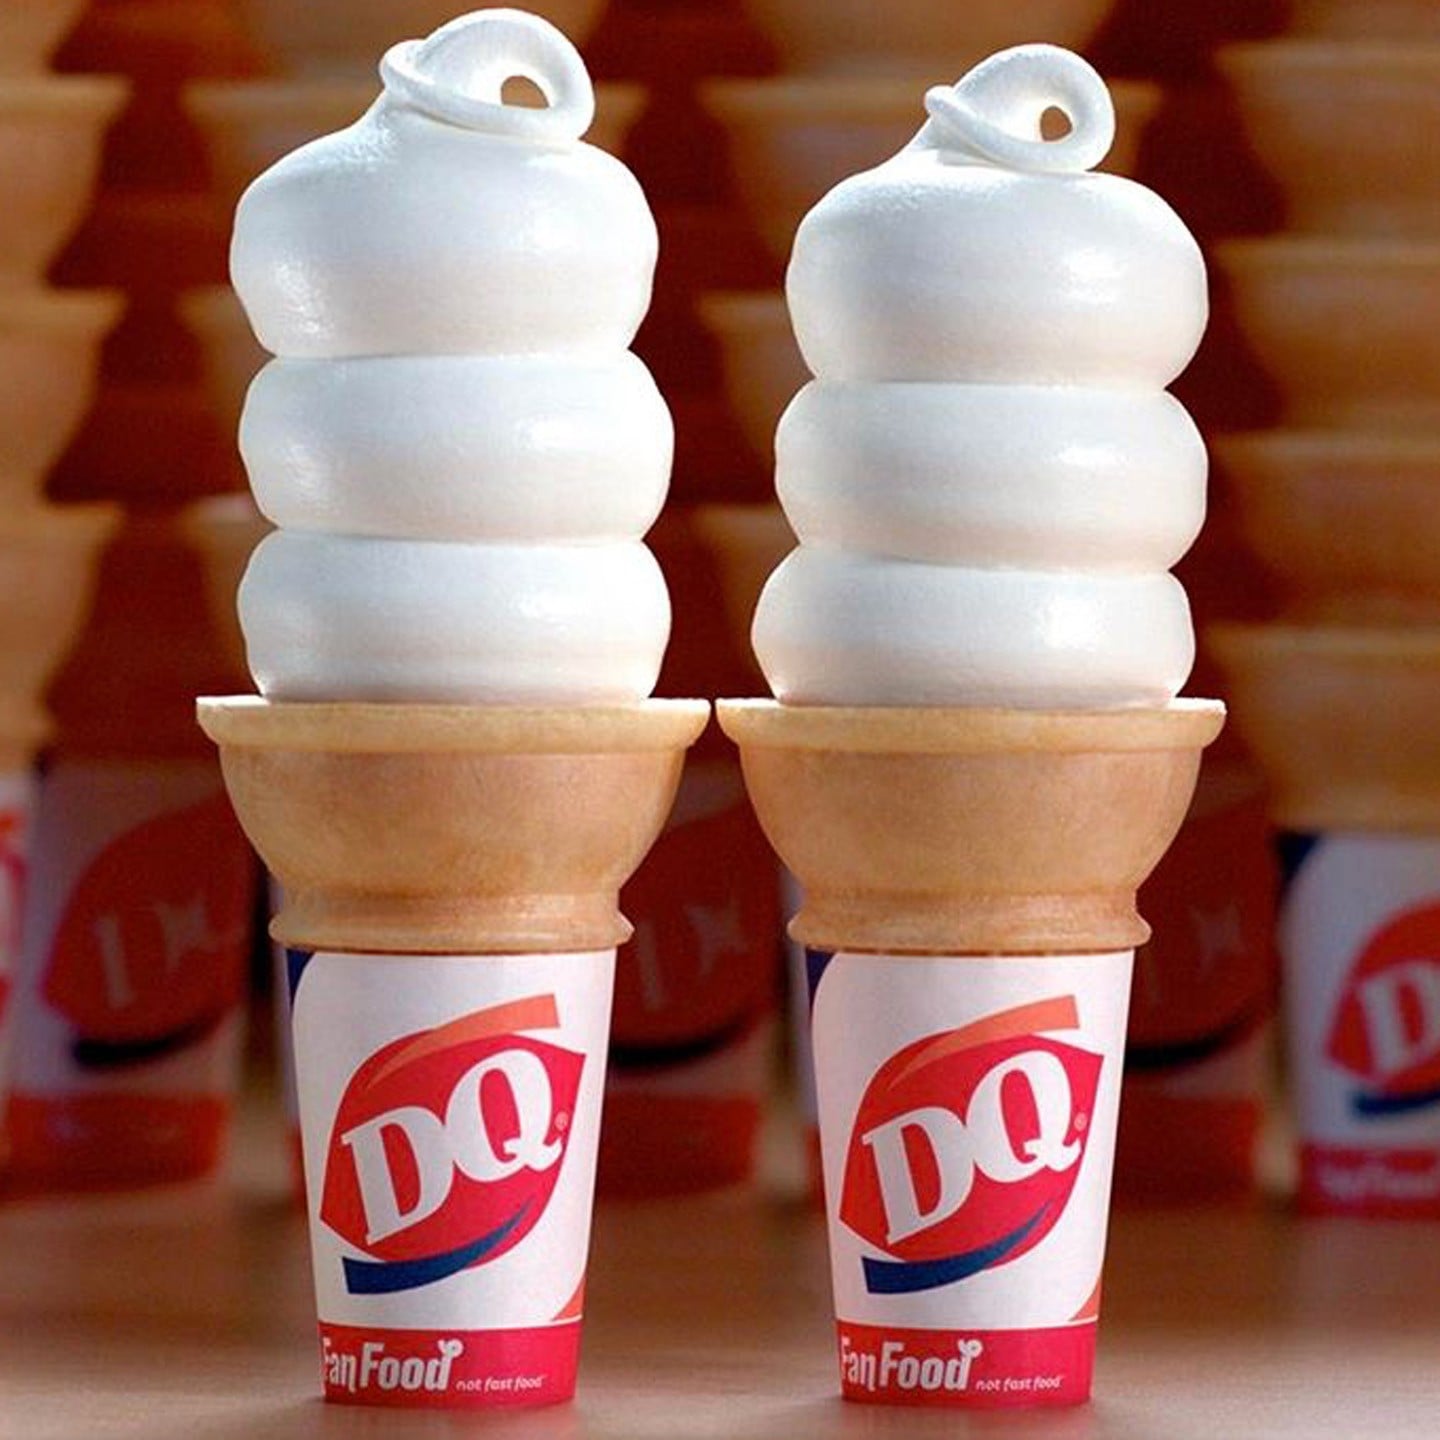 Dairy Queen is giving away free cones to celebrate the first day of